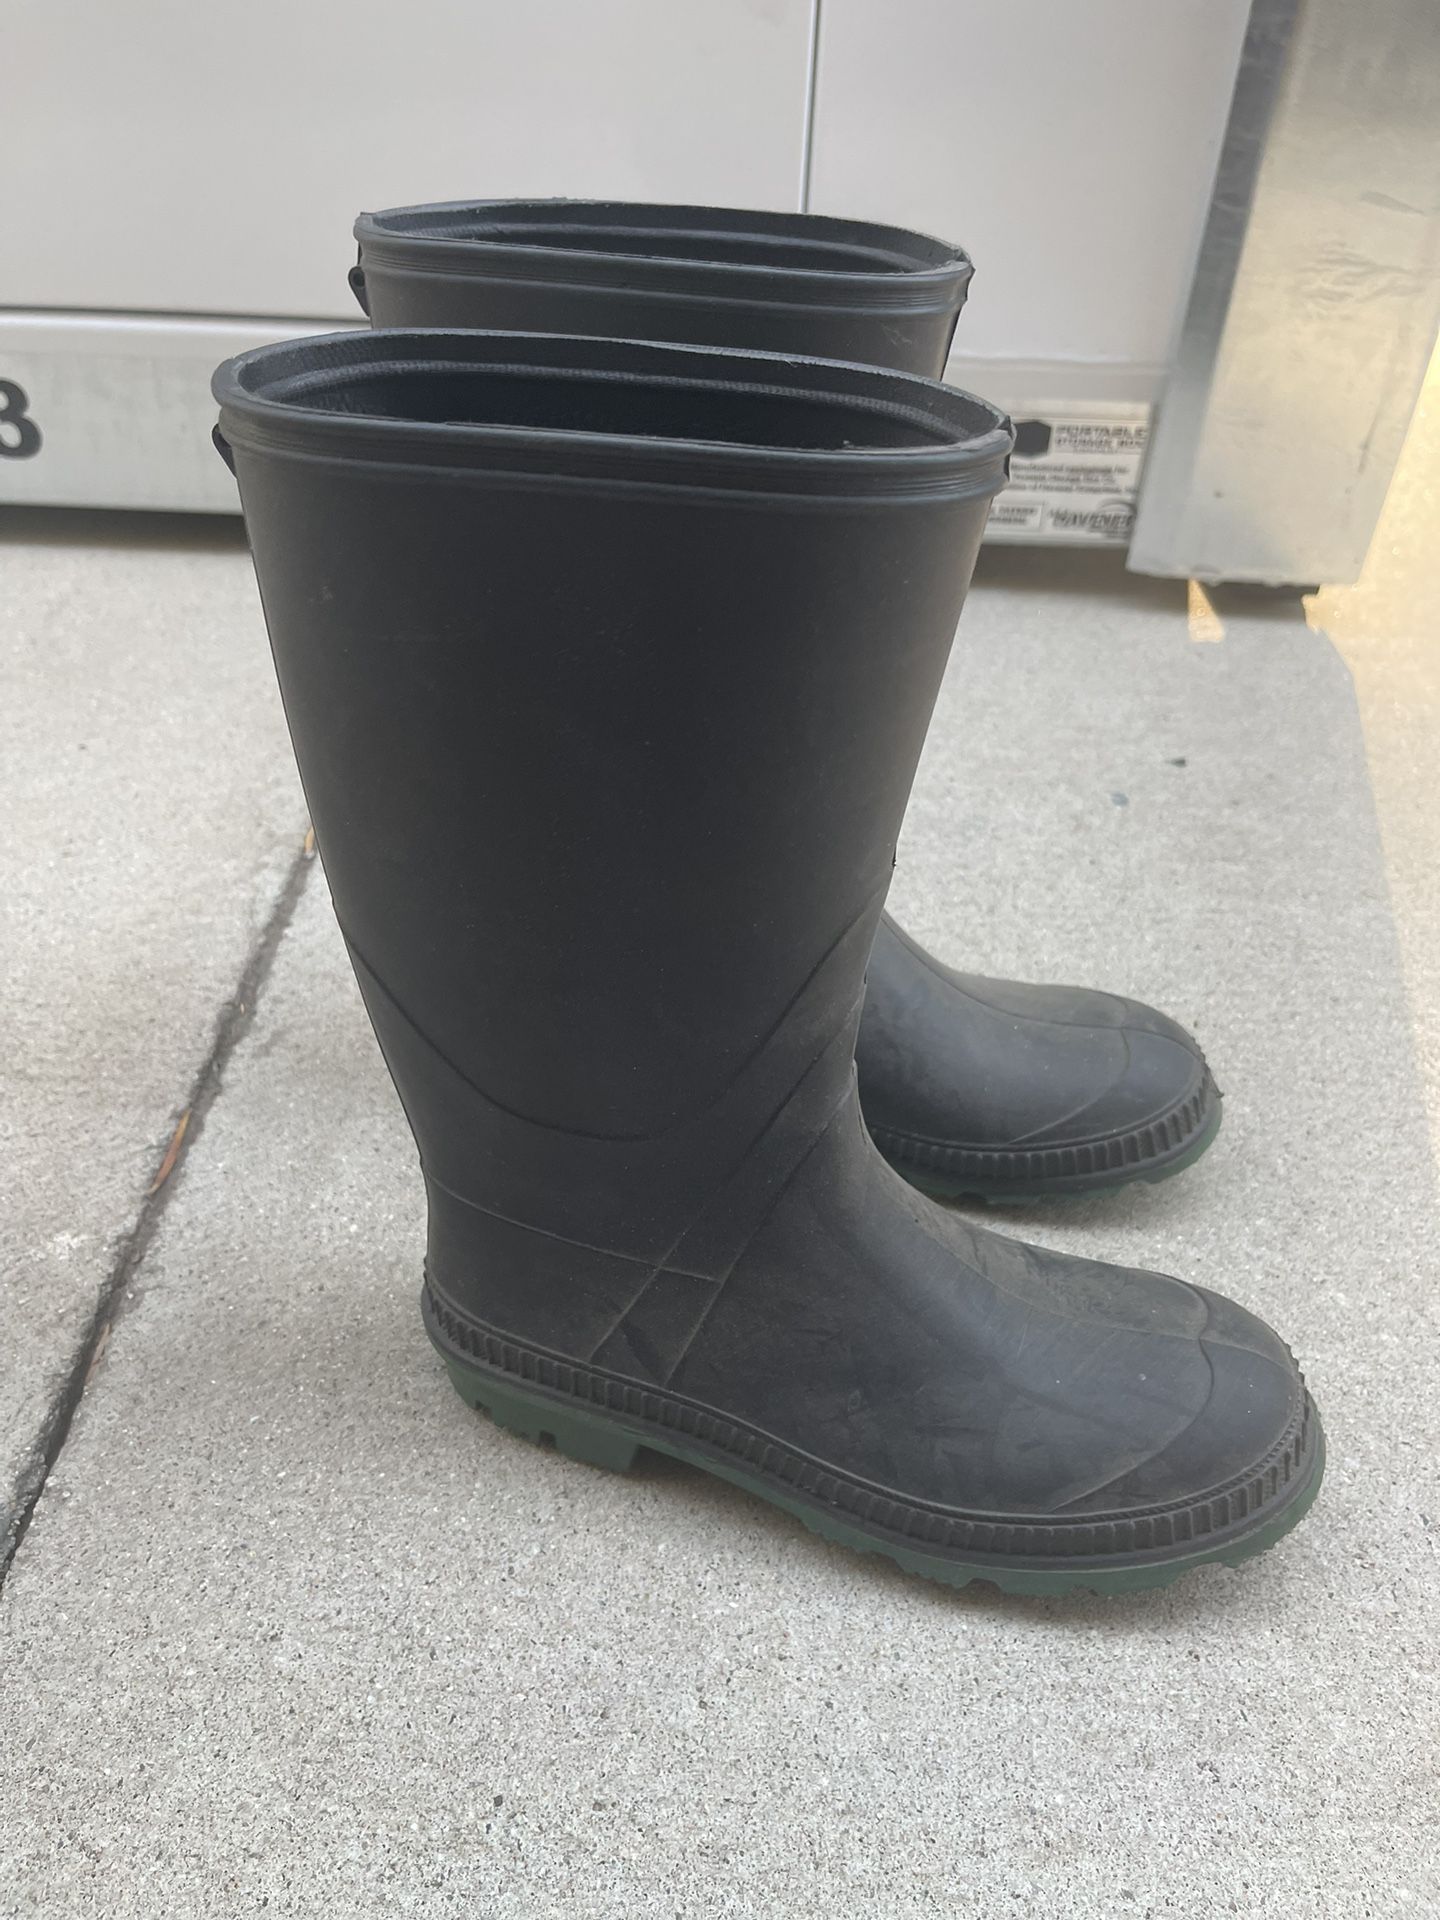 Rubber Boots - Size 6